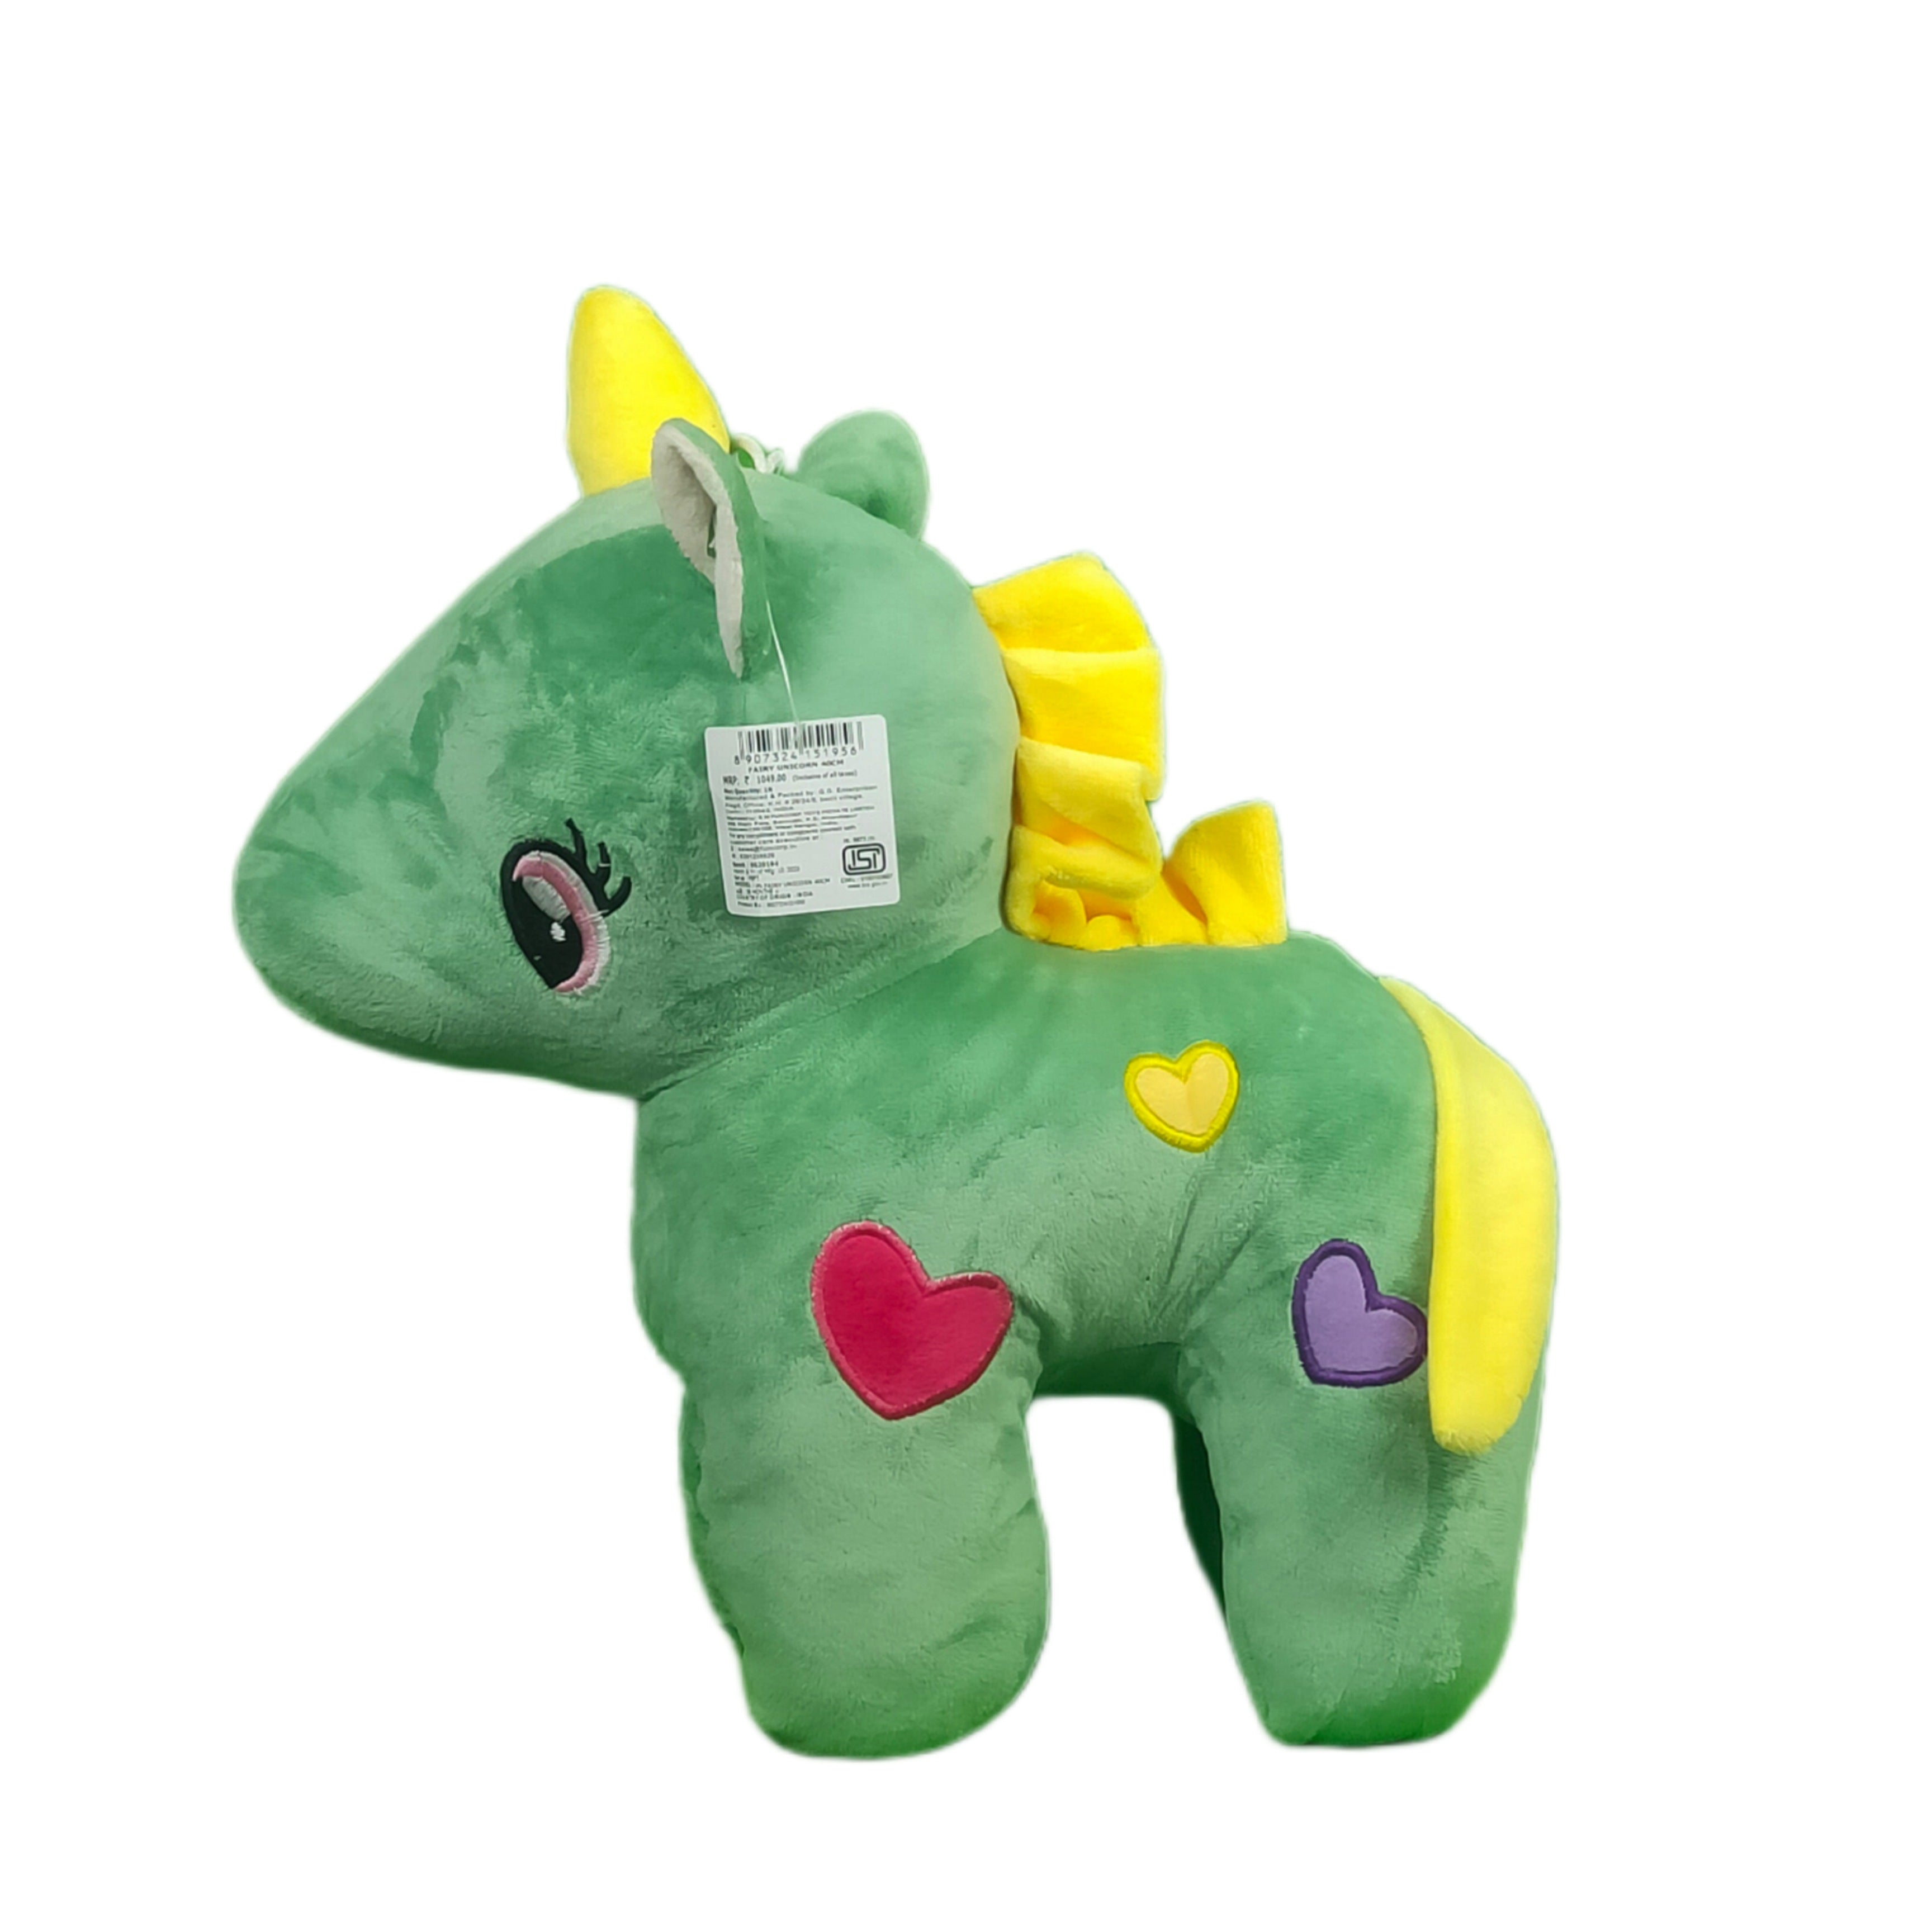 Play Hour Fairy Unicorn Plush Soft Toy For Ages 3 Years And Up - Green, 40cm